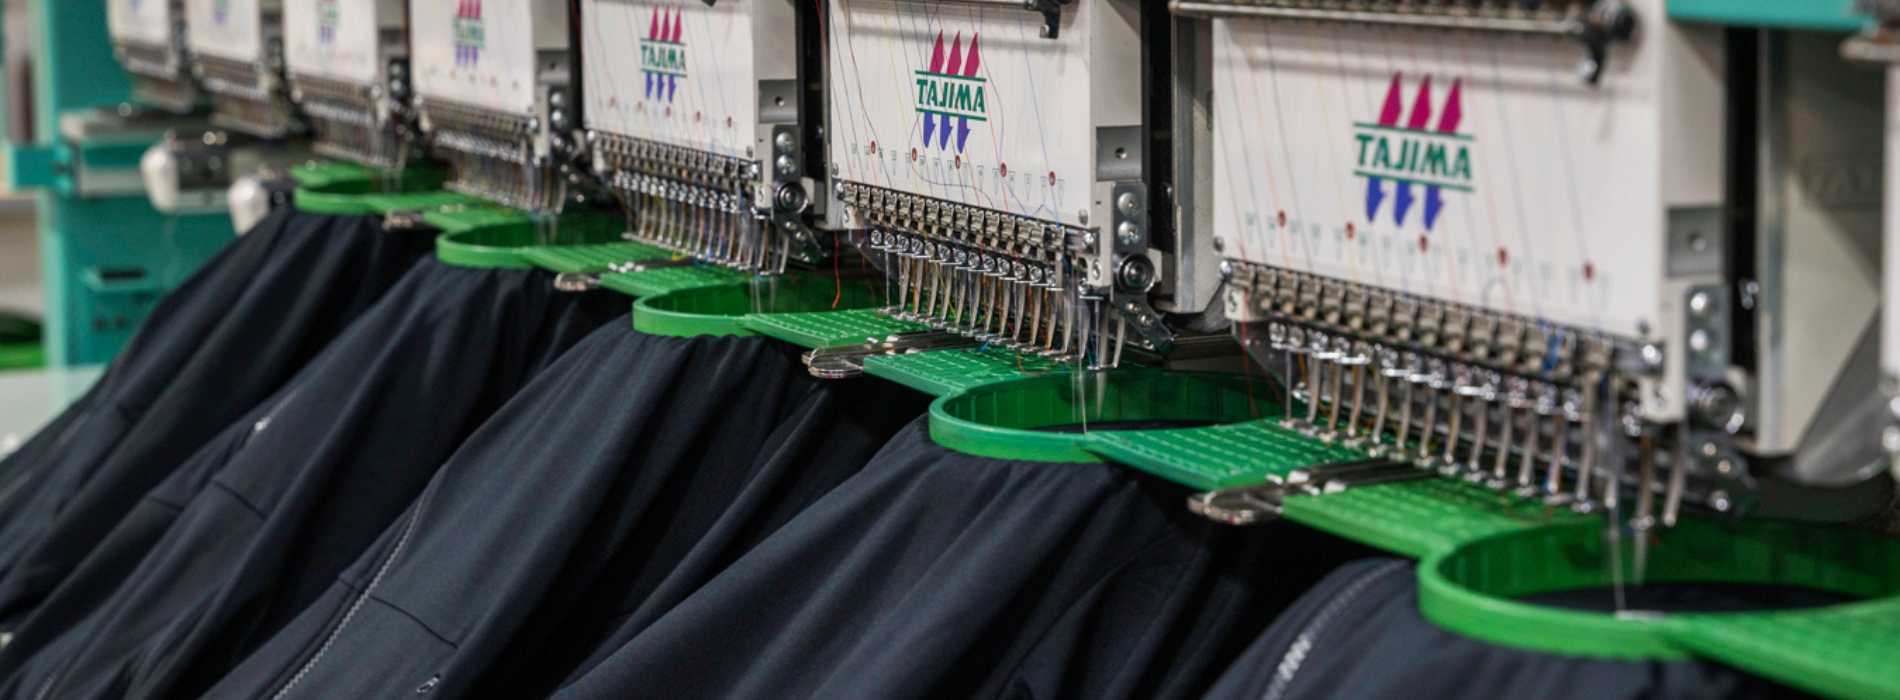 black shirts getting embroidered by a line of embroidery machines